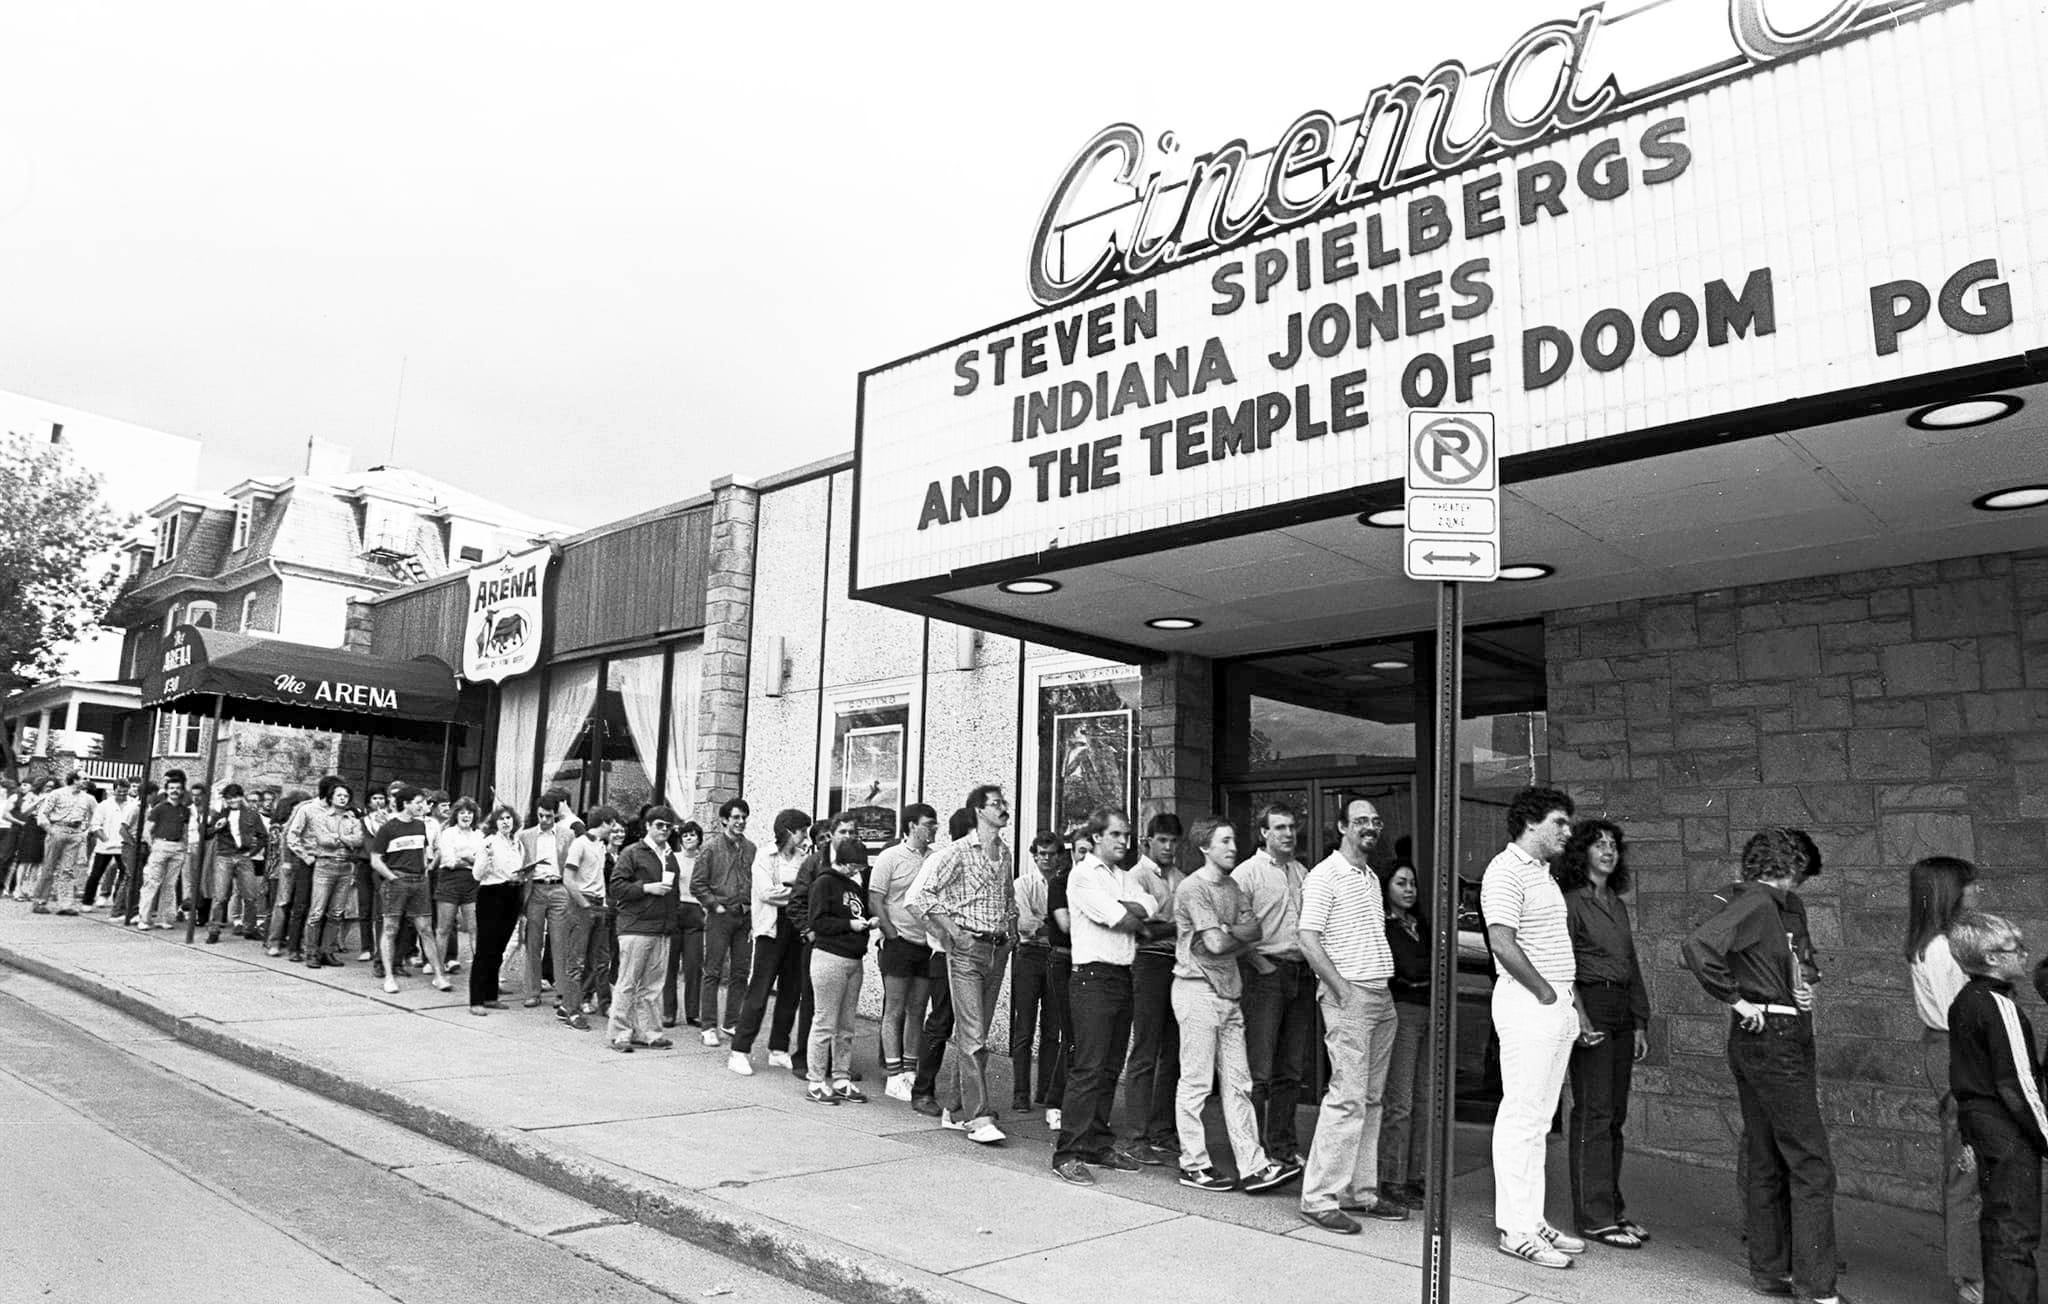 black and white photo of a long line of people outside a movie theater advertising "Steven Spielbergs Indian Jones and the Temple of Doom" by Pat Little